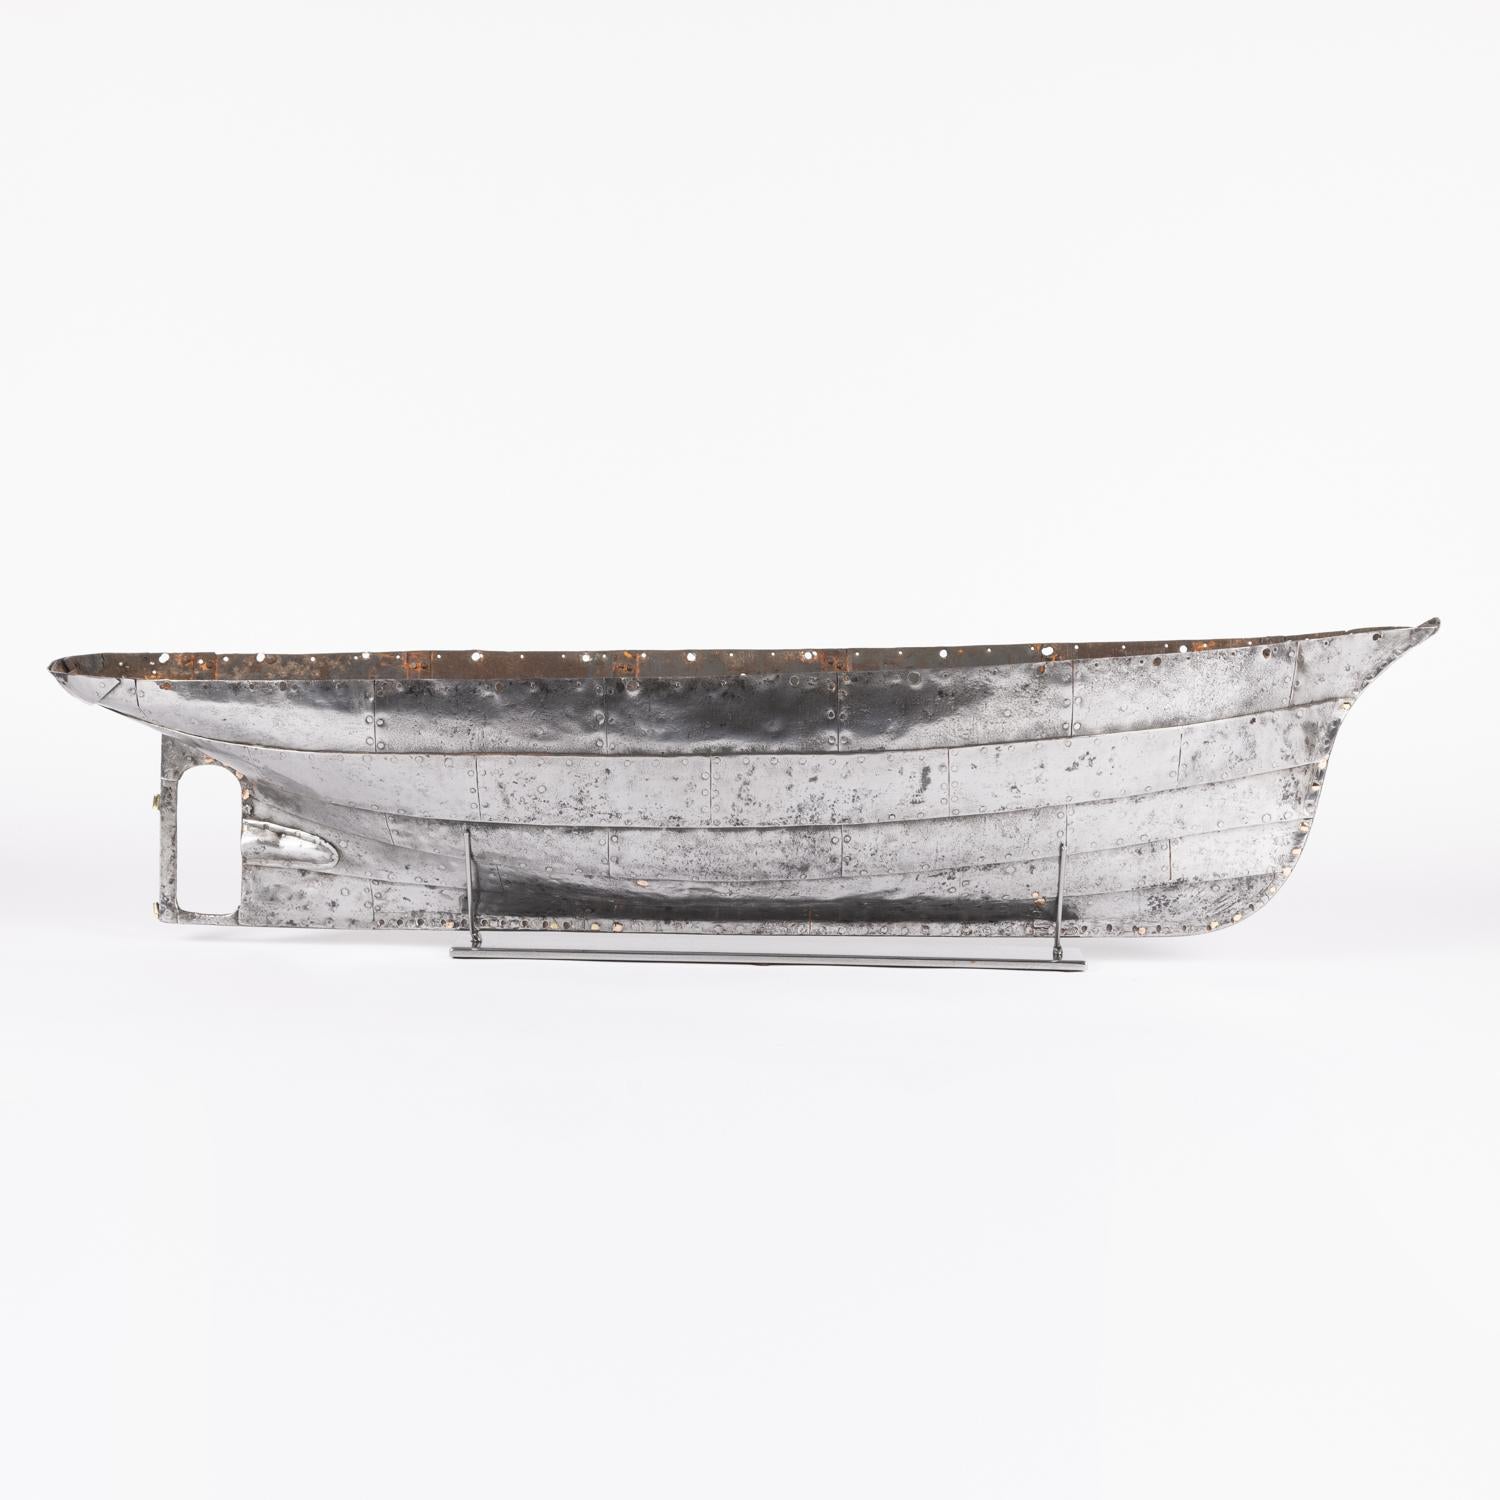 A mid 19th century riveted steel plate hull of a model steam yacht. 4